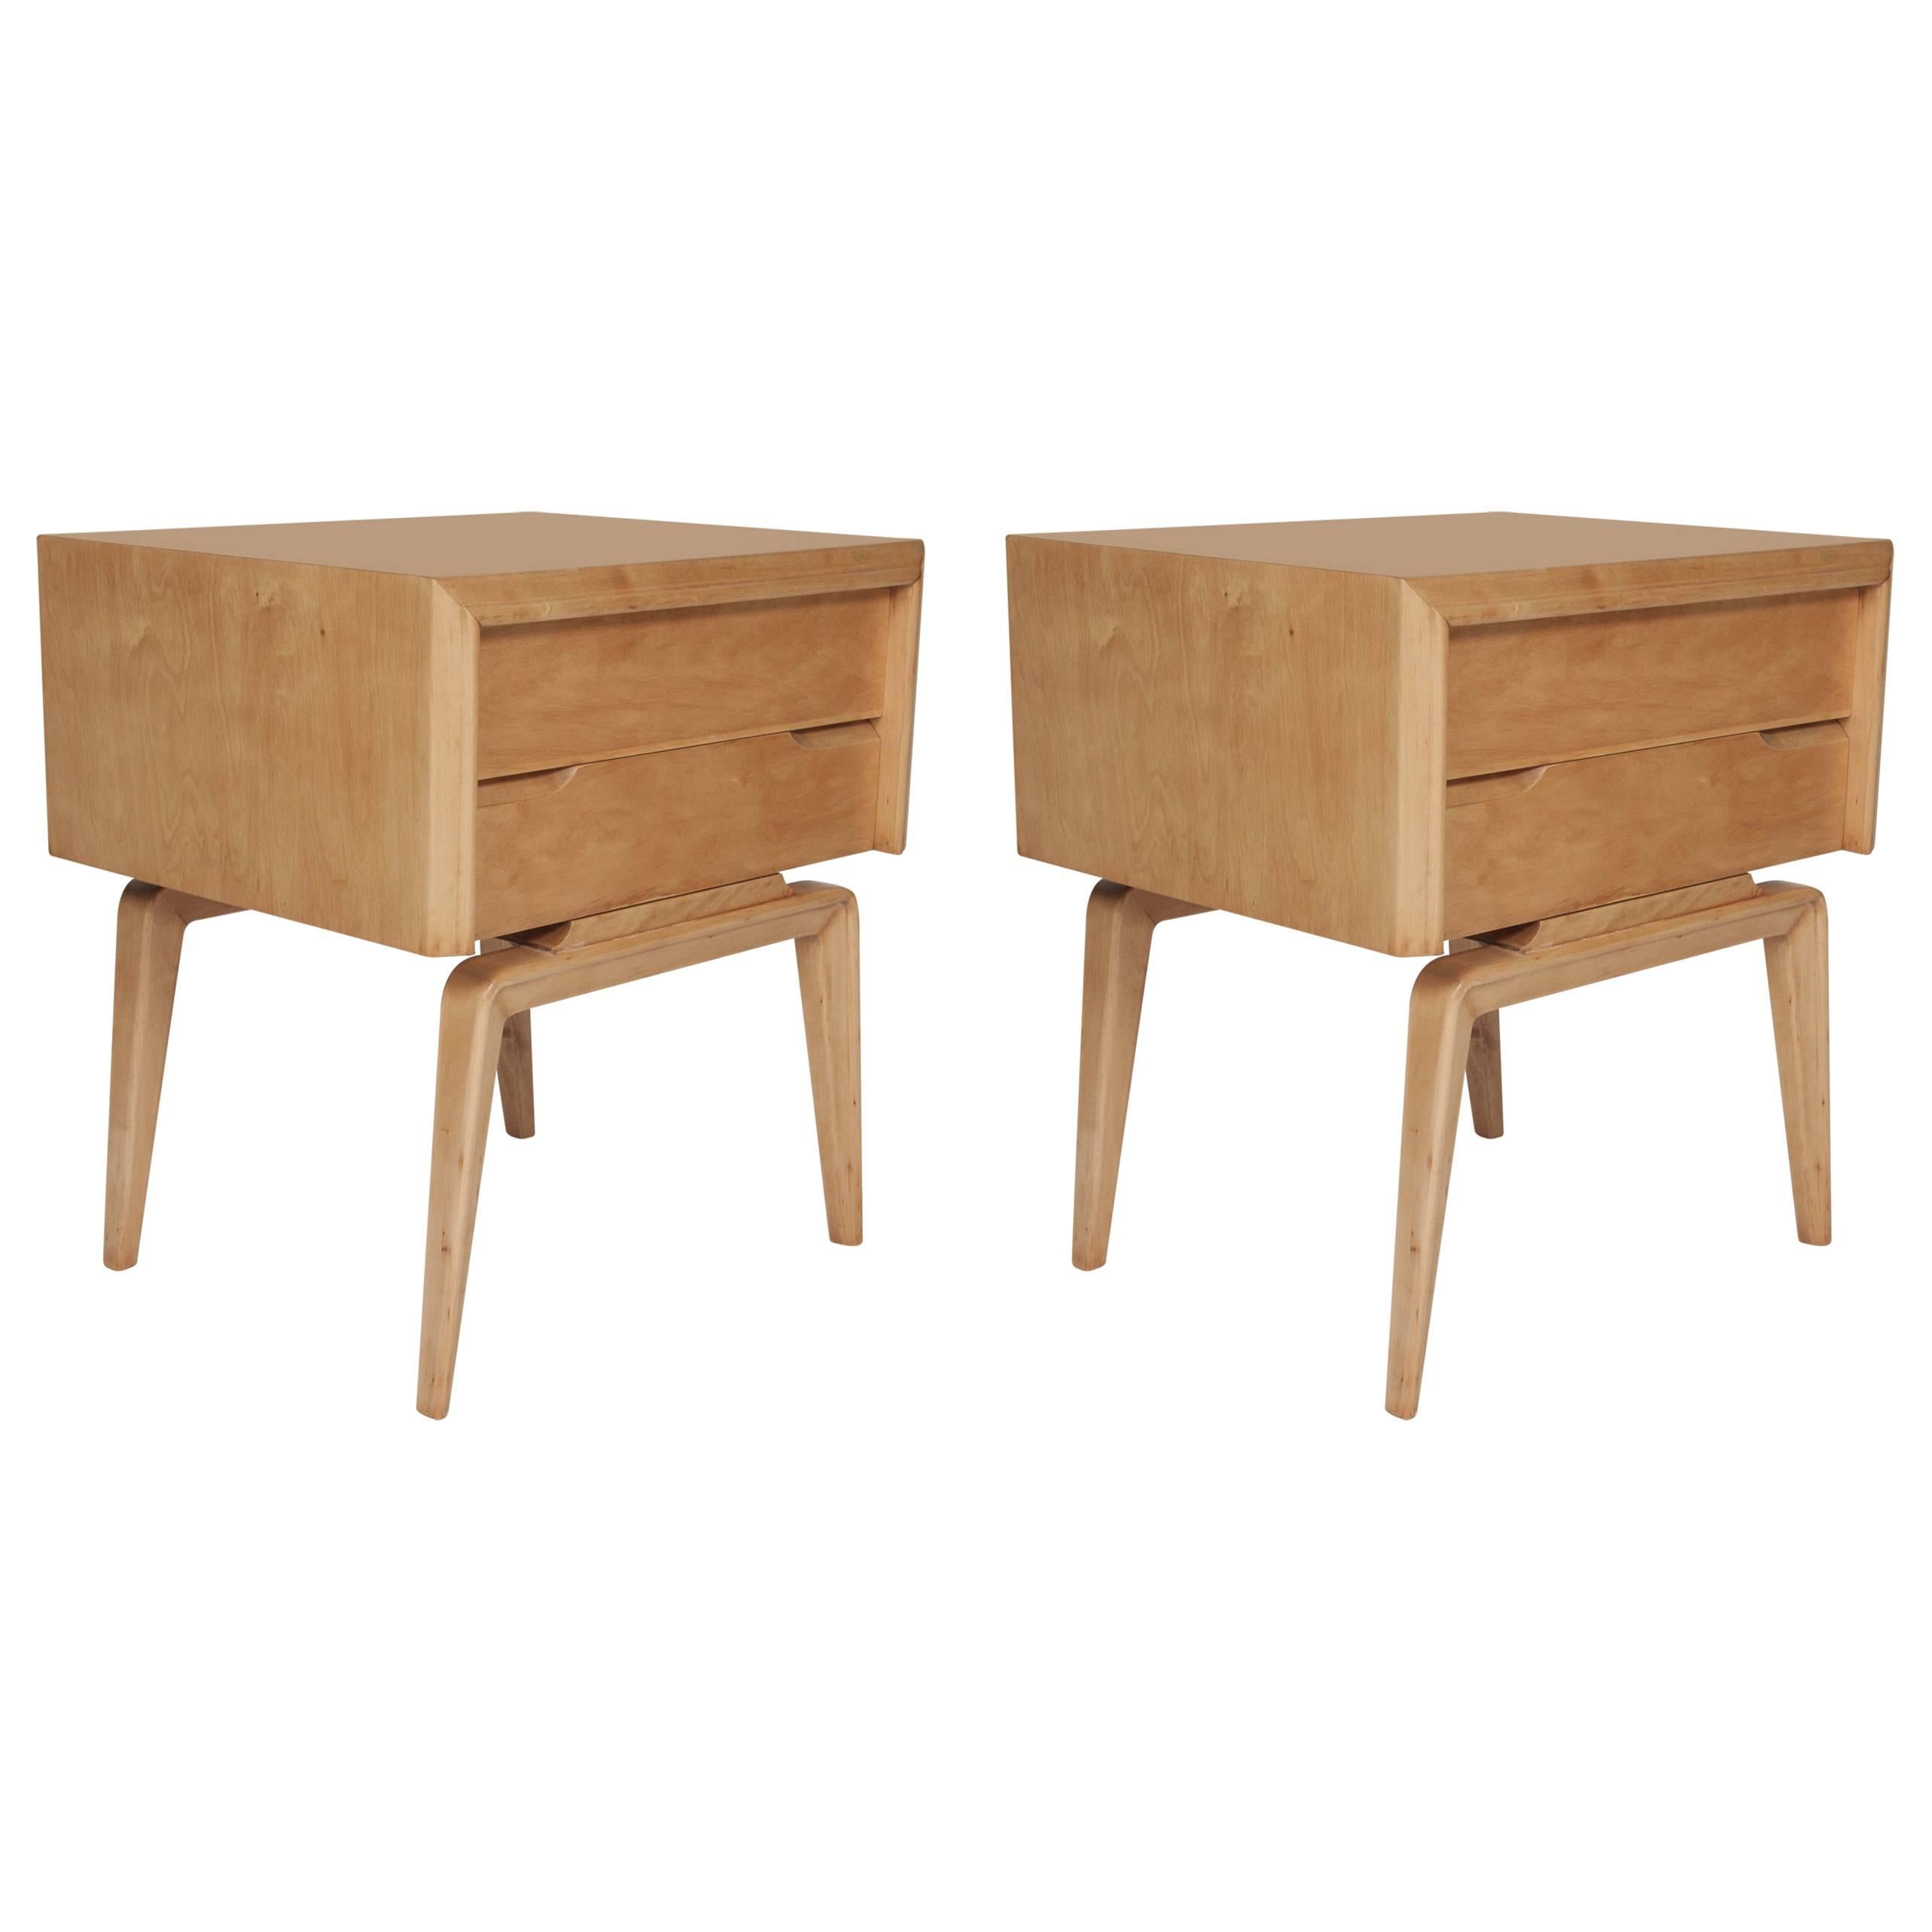 Pair of Bedside Tables by Edmond Spence